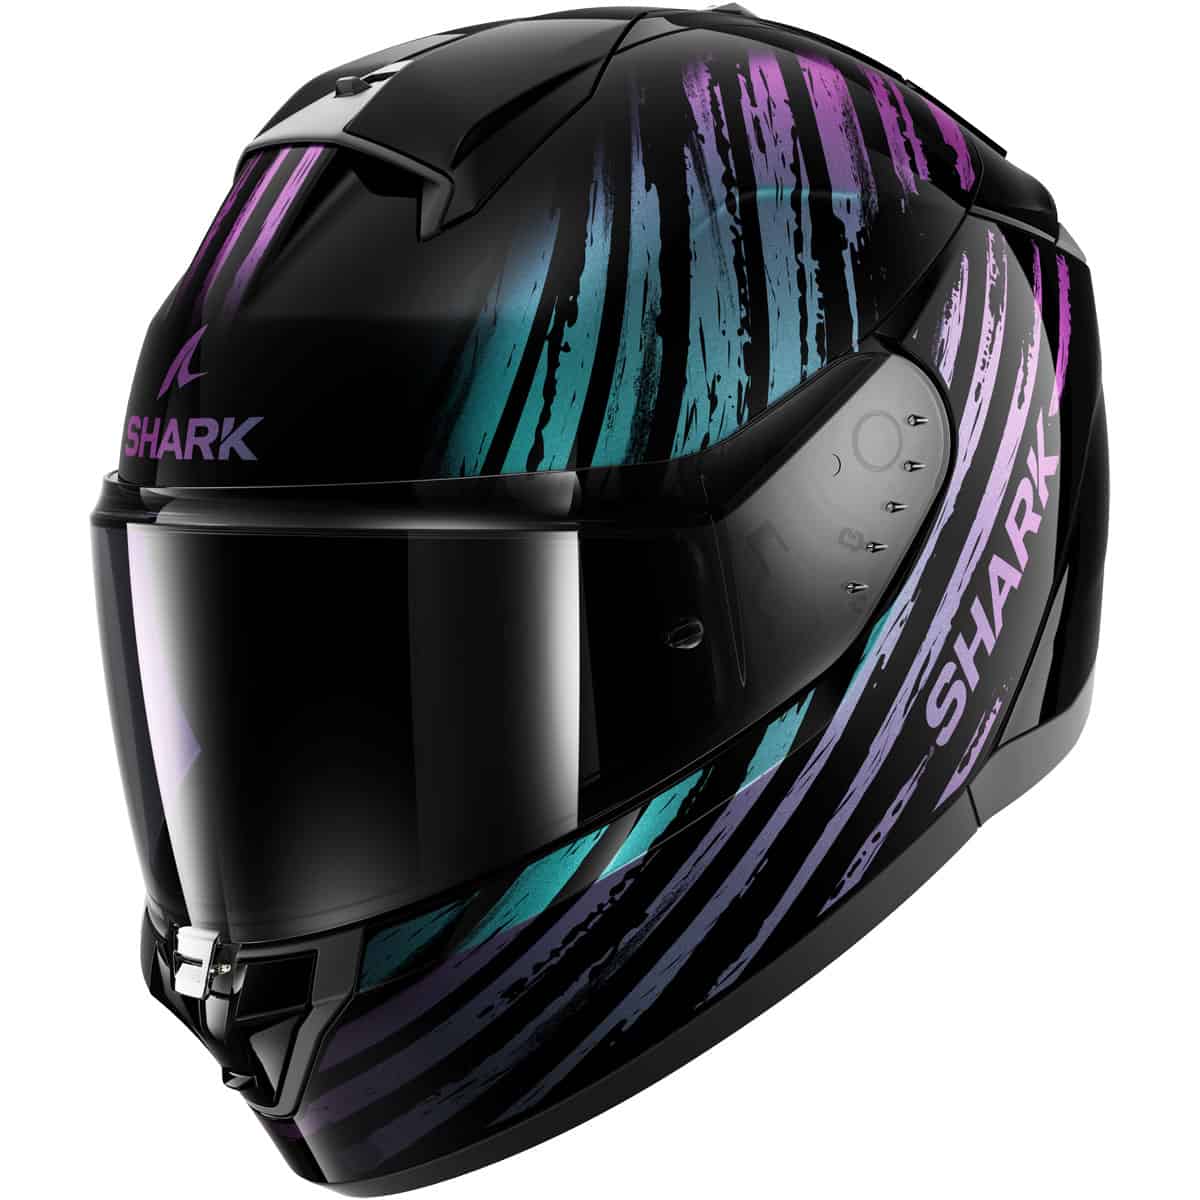 The Shark Ridill 2 is the best of both worlds: a stylish streetwear helmet with advanced safety features